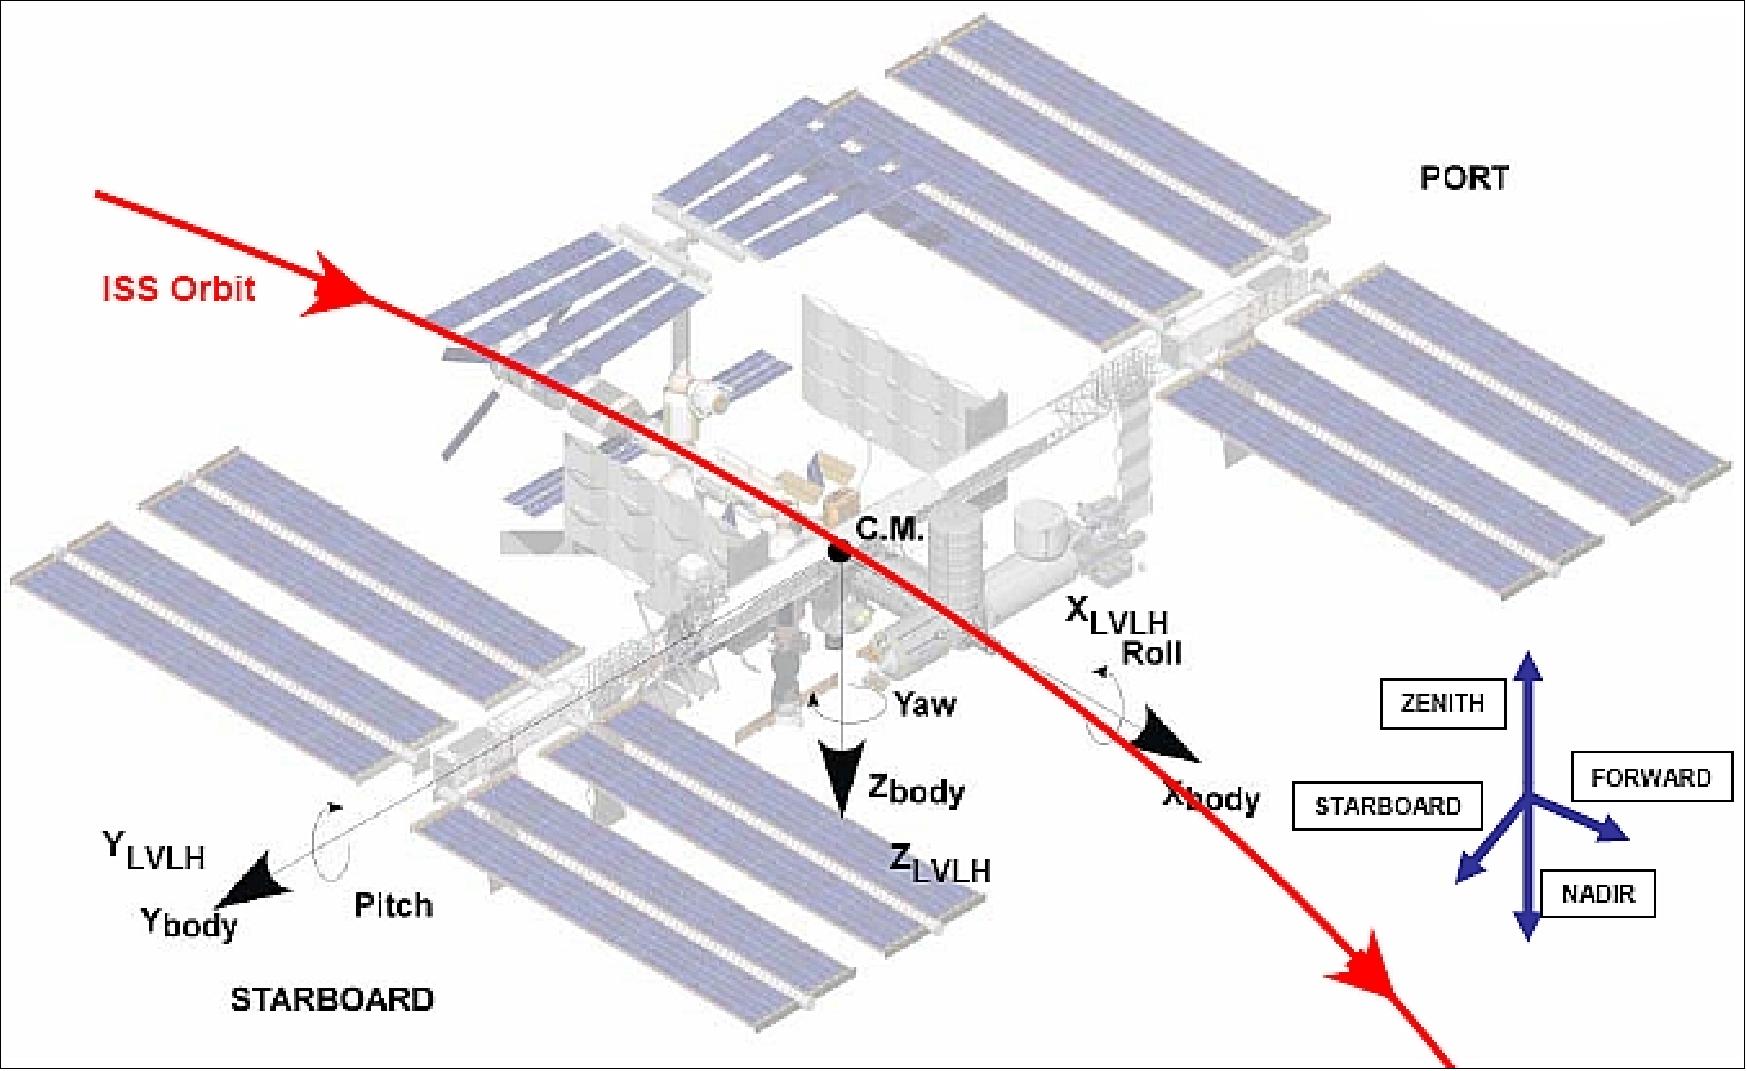 Figure 2: Schematic view of the ISS with some orbit and attitude parameter conventions (image credit: ESA, NASA, Ref. 1)